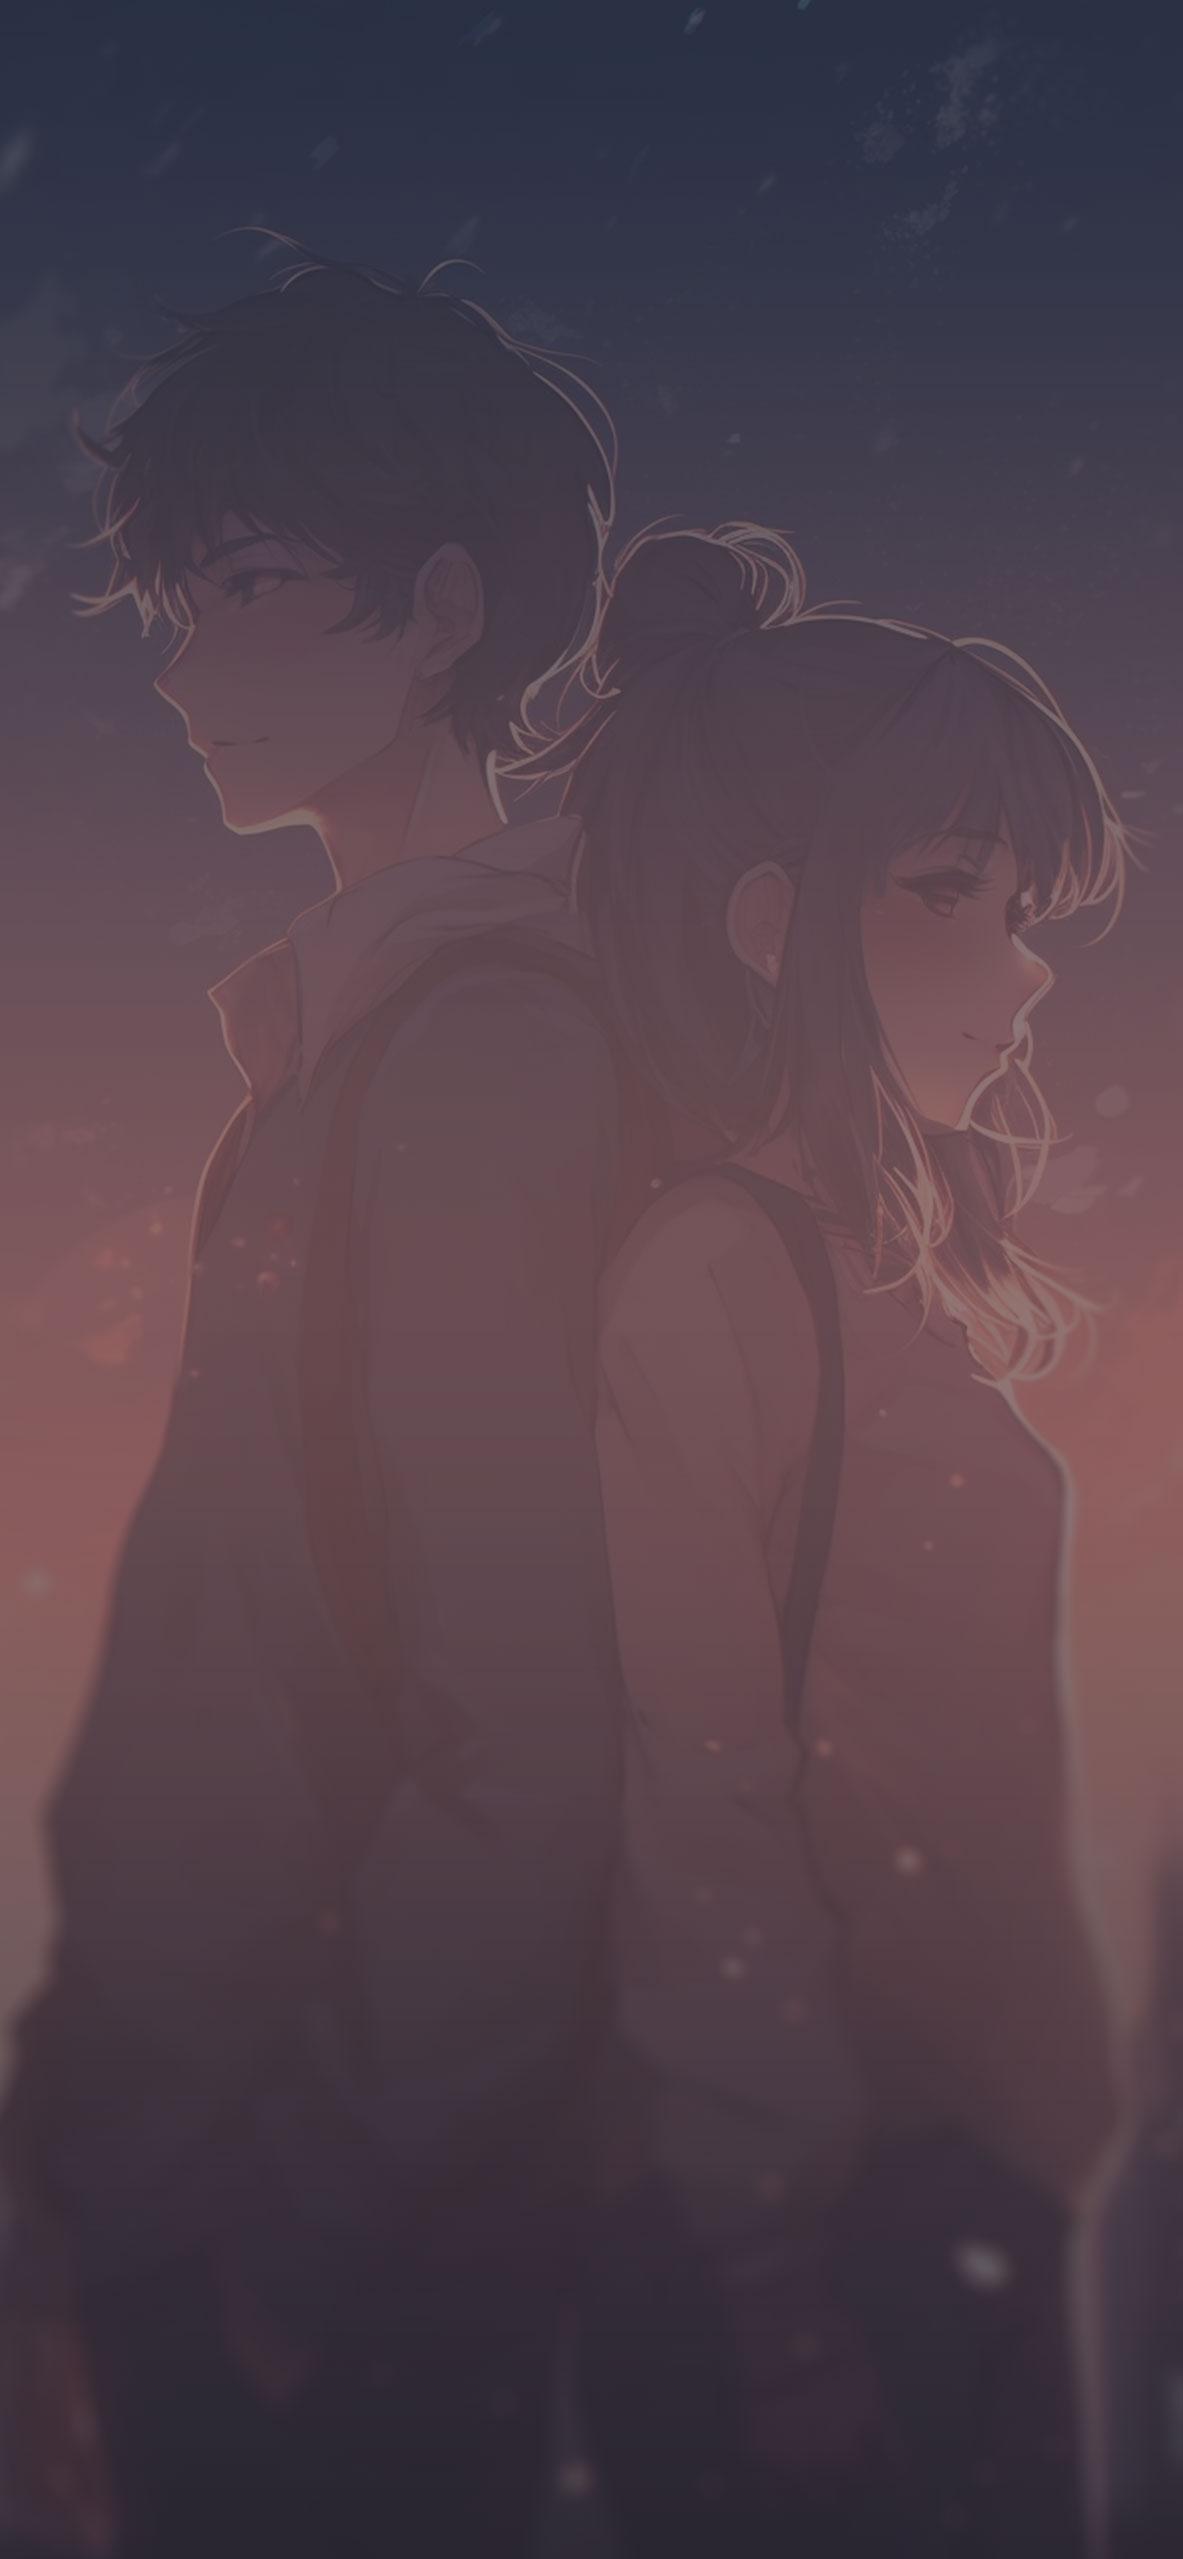 Boy Girl in Love Anime Wallpapers Anime Aesthetic Wallpapers